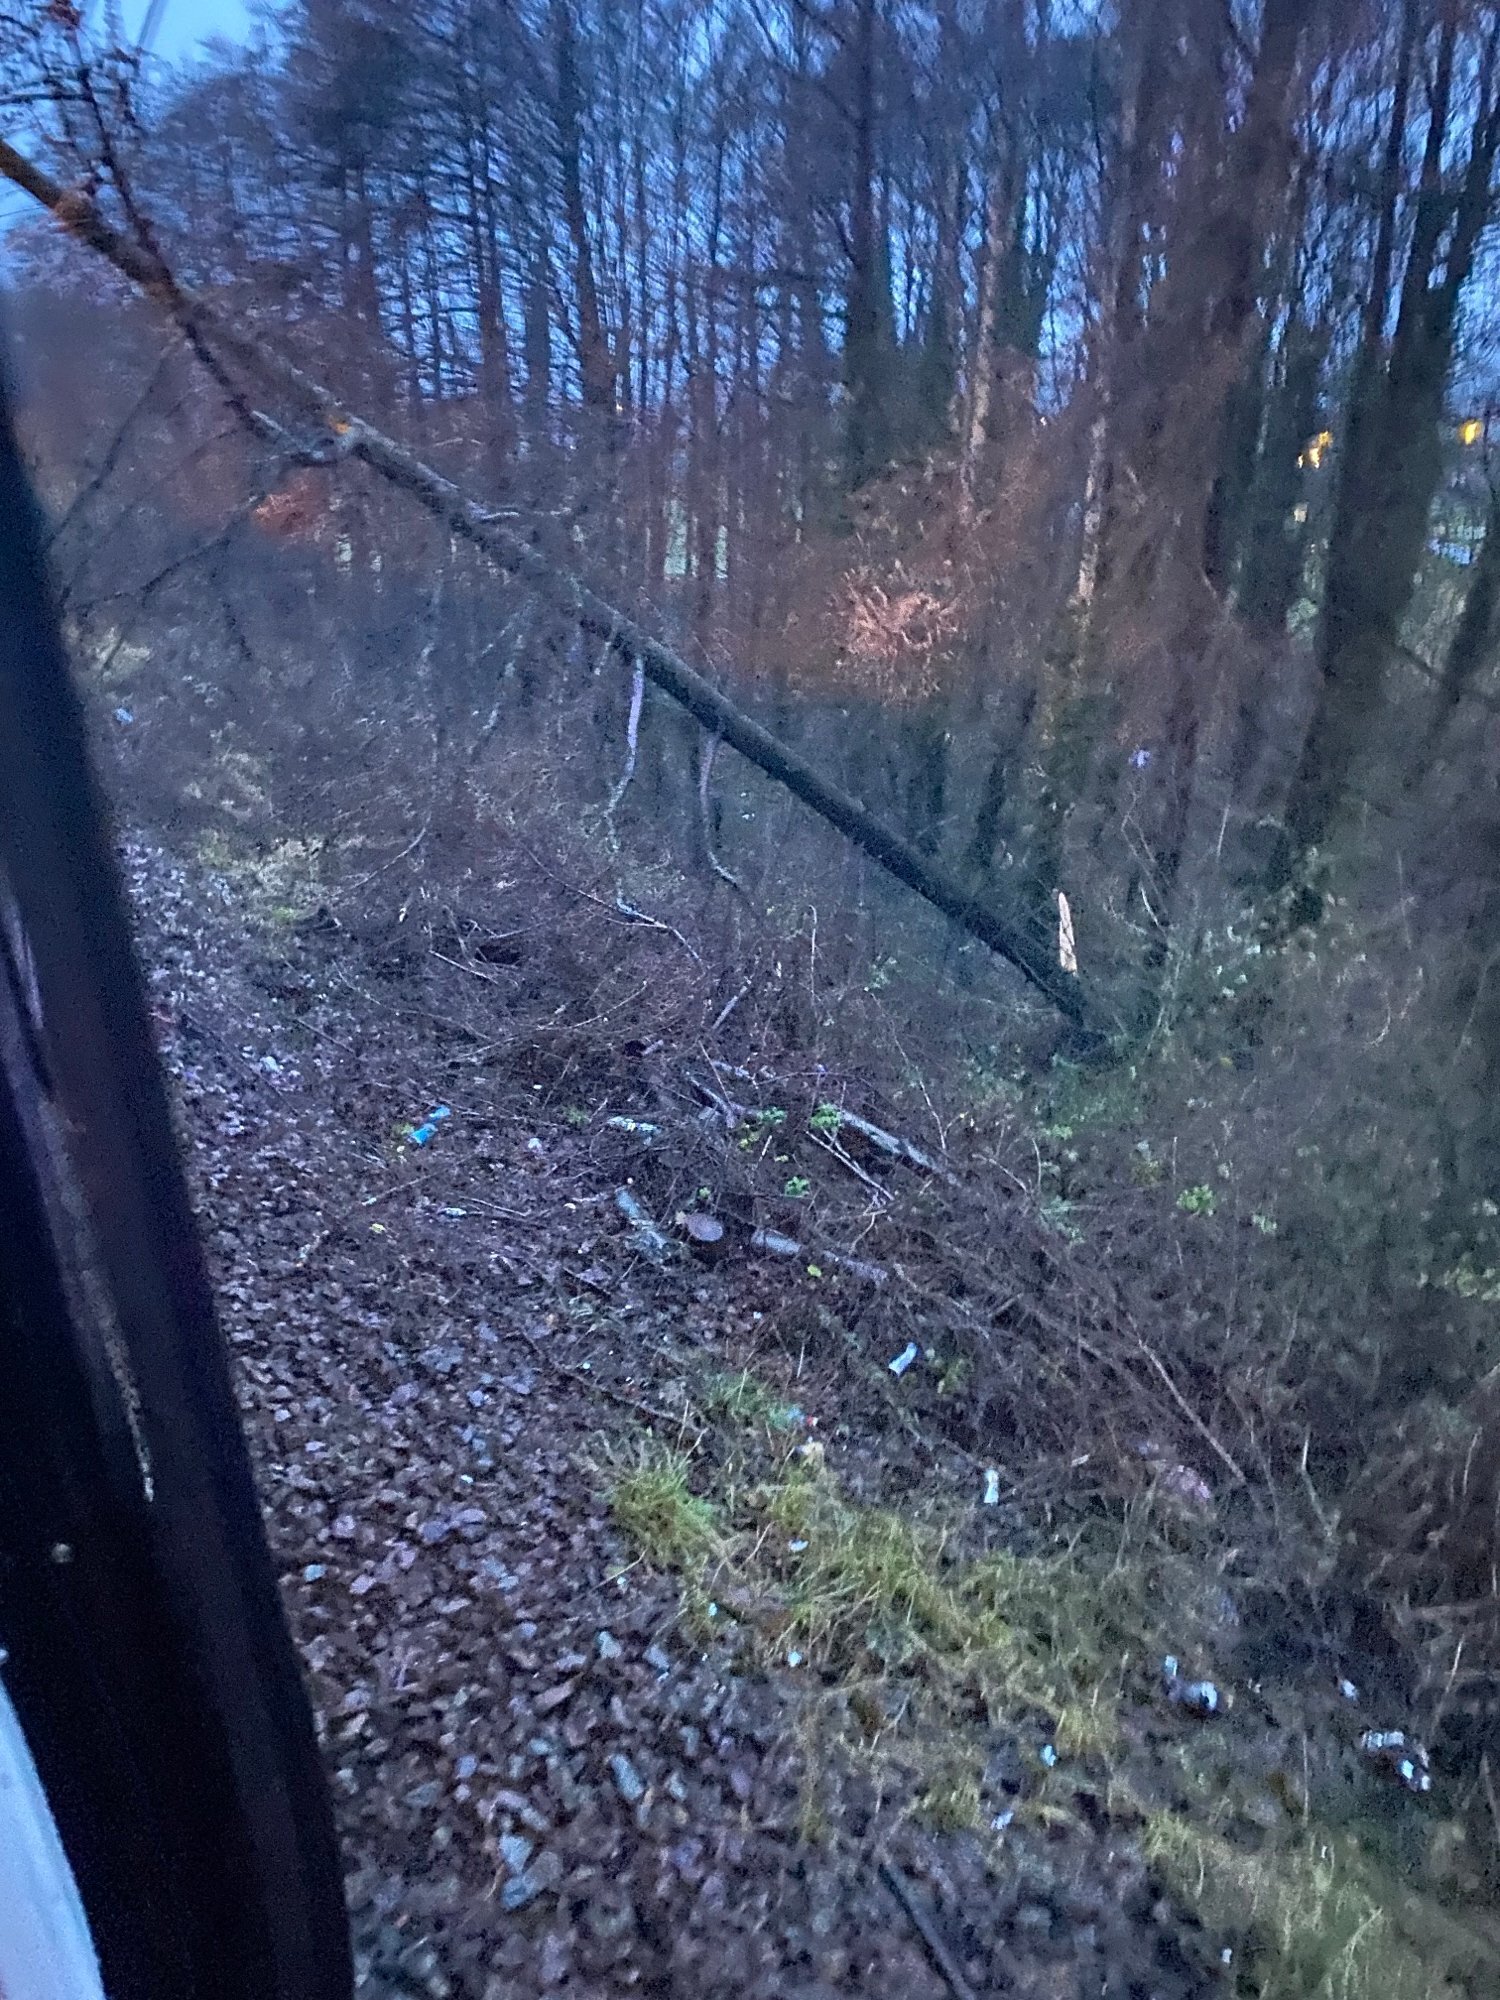 The tree disrupting services for passengers. Photo by Network Rail